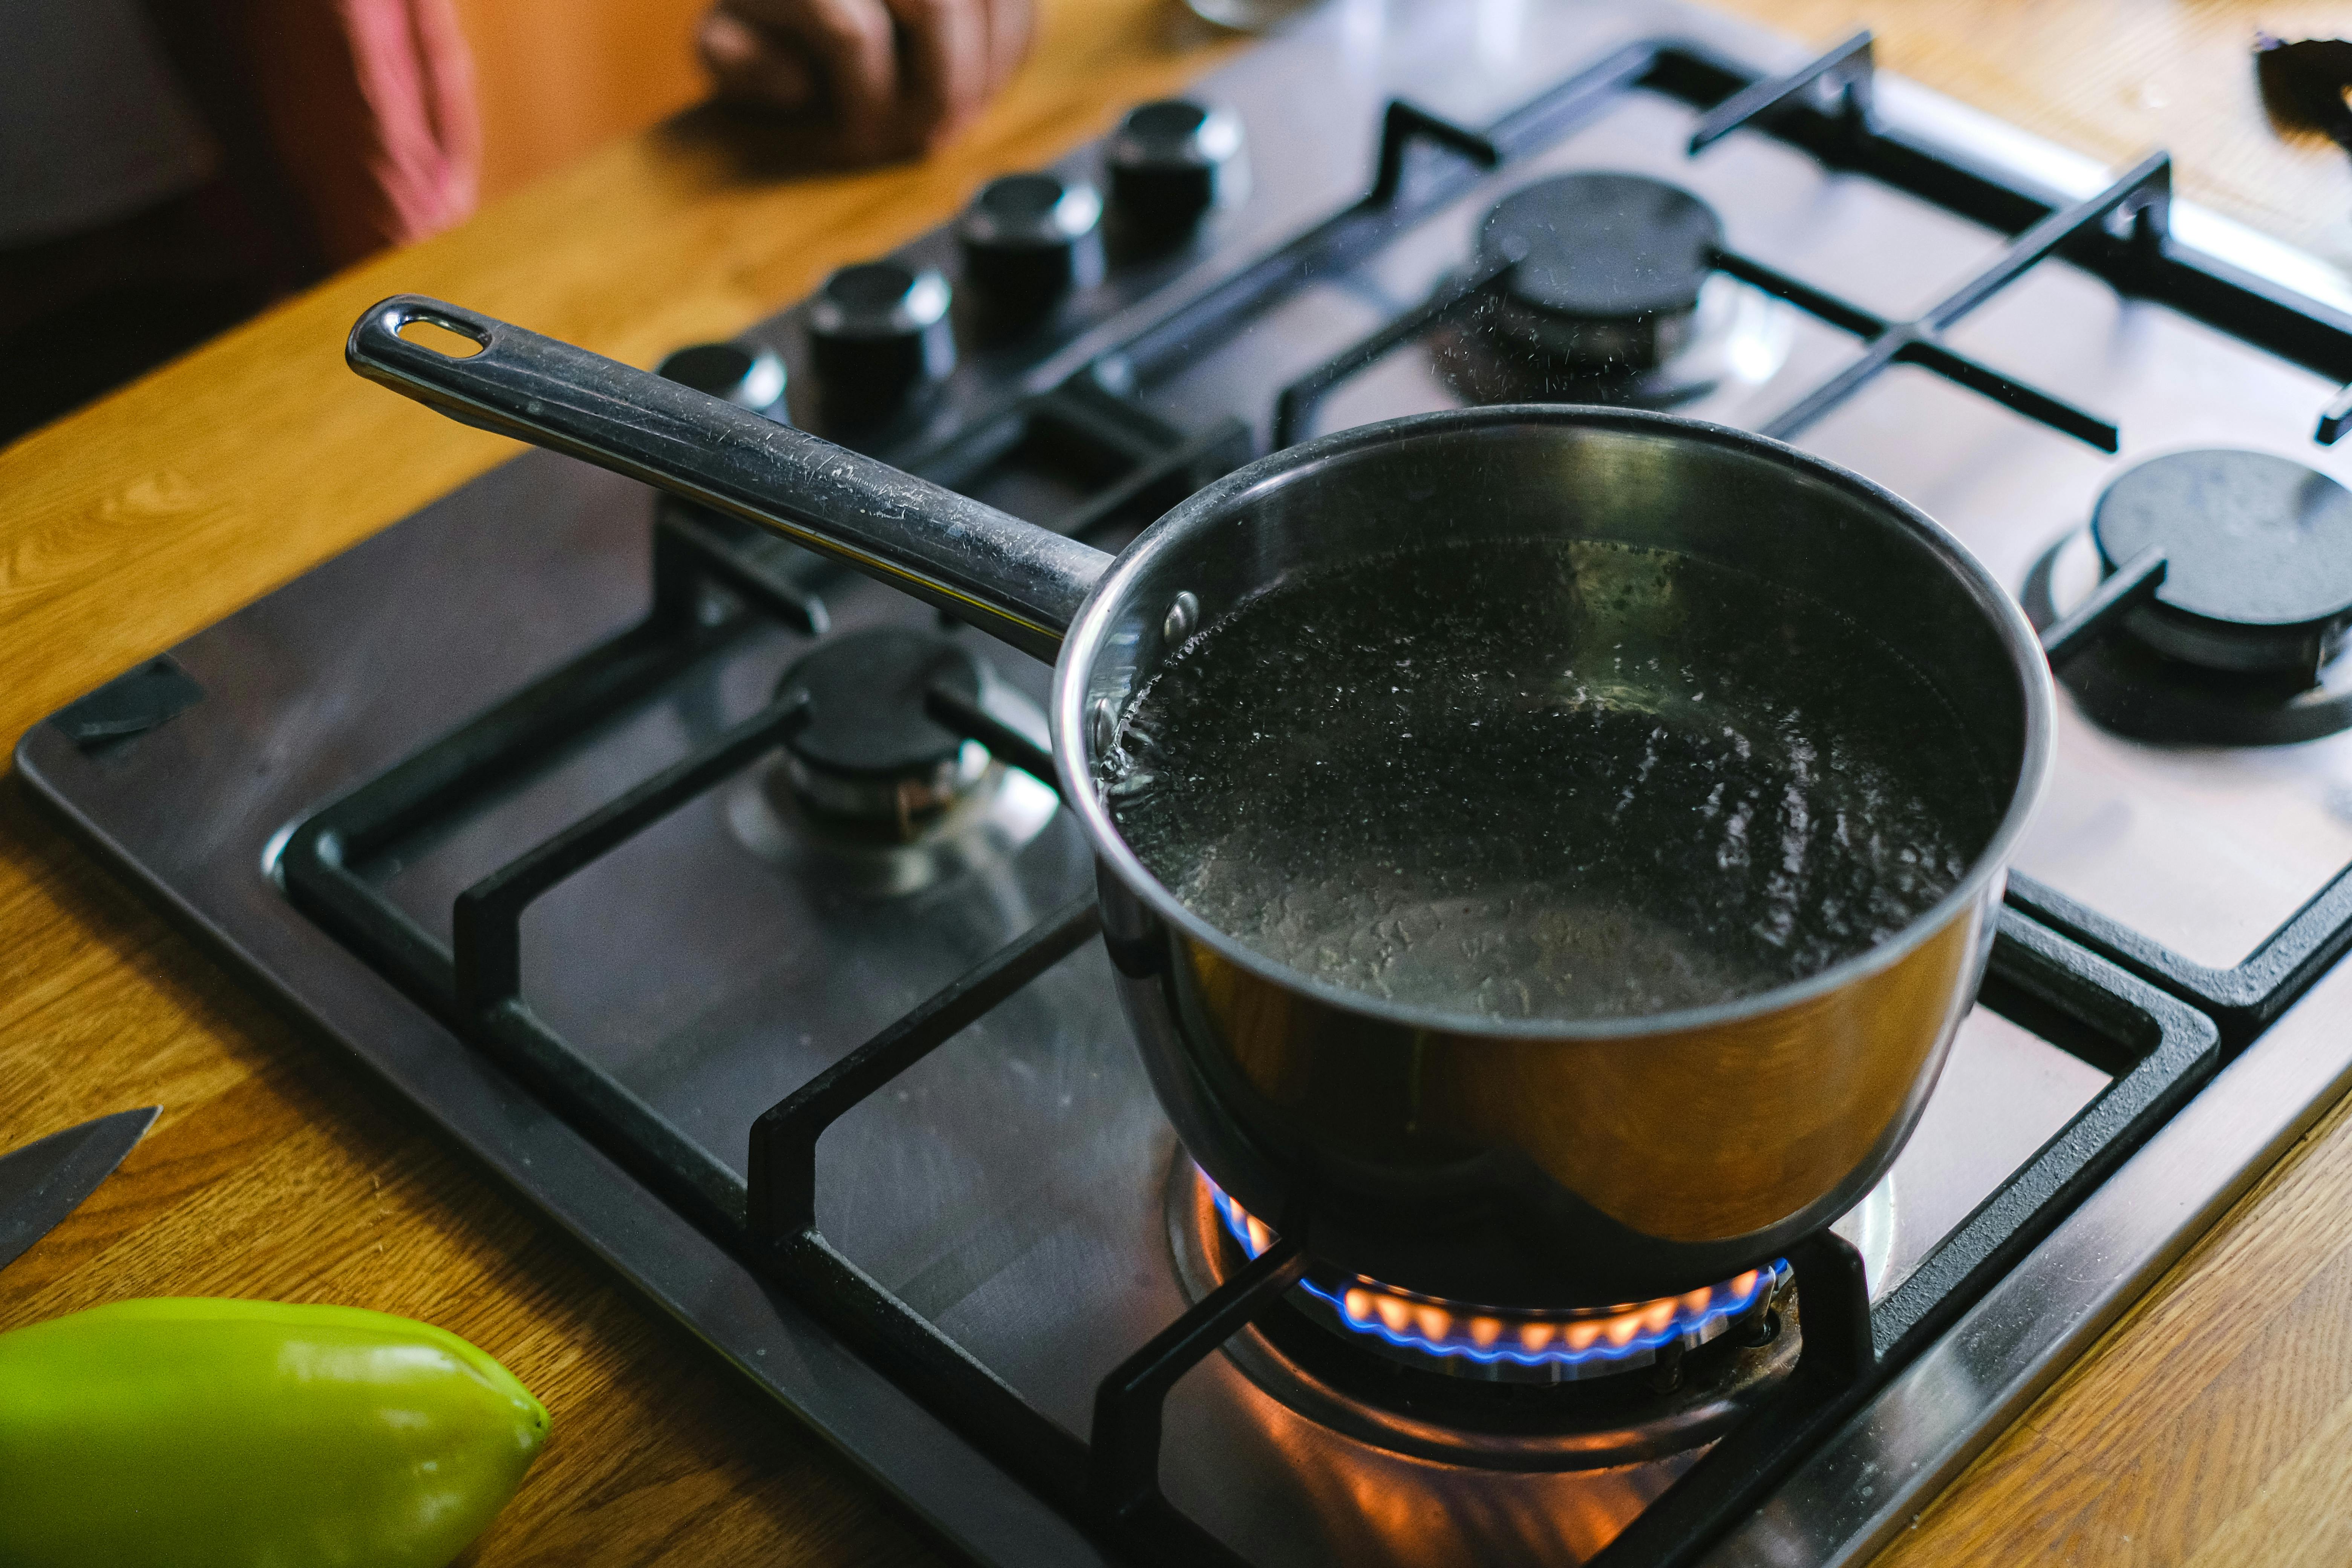 Boiling water in a pot | Source: Pexels